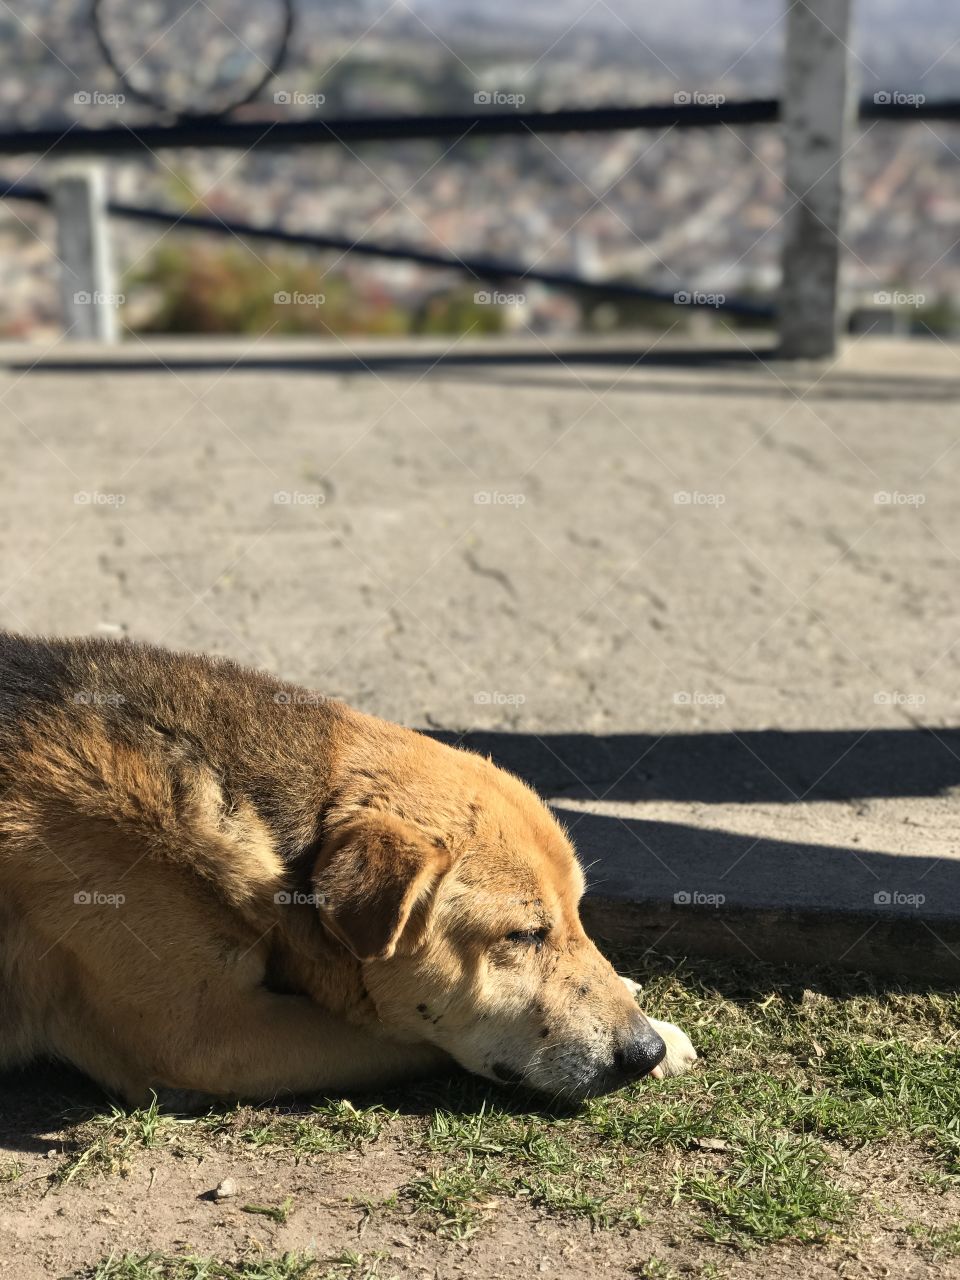 Stray dog taking a quick snooze near a Quito Ecuador monument on a sunny spring day